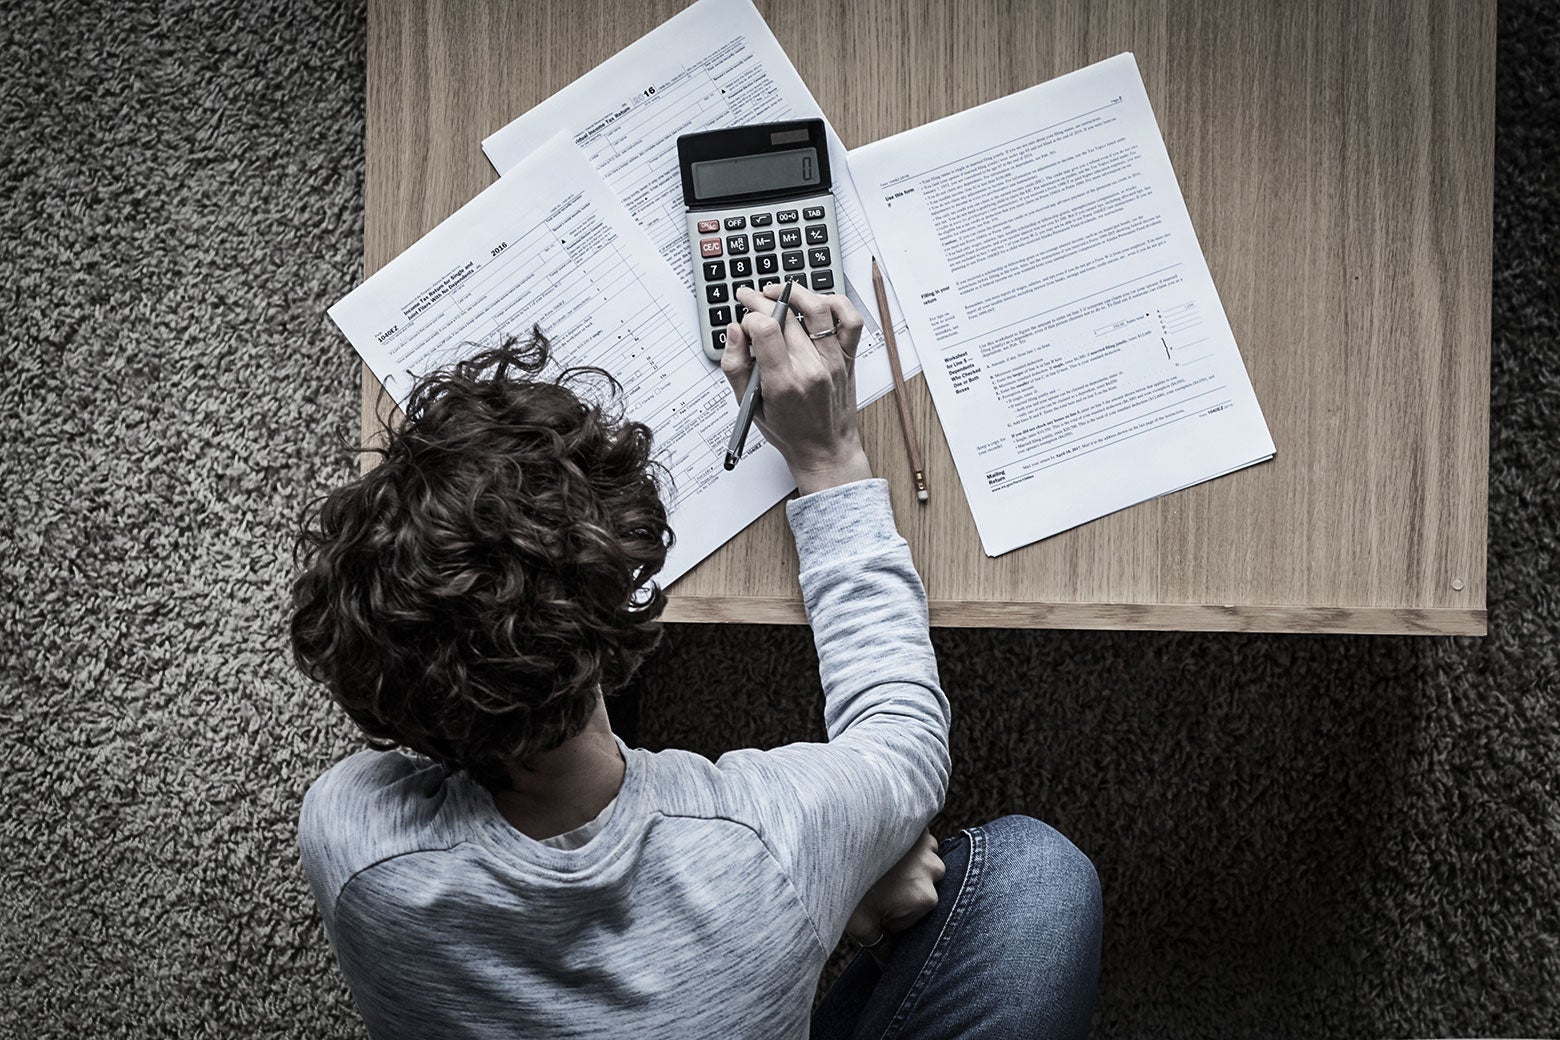 A man sits at a desk holding a pen, tax documents and a calculator spread out in front of him.